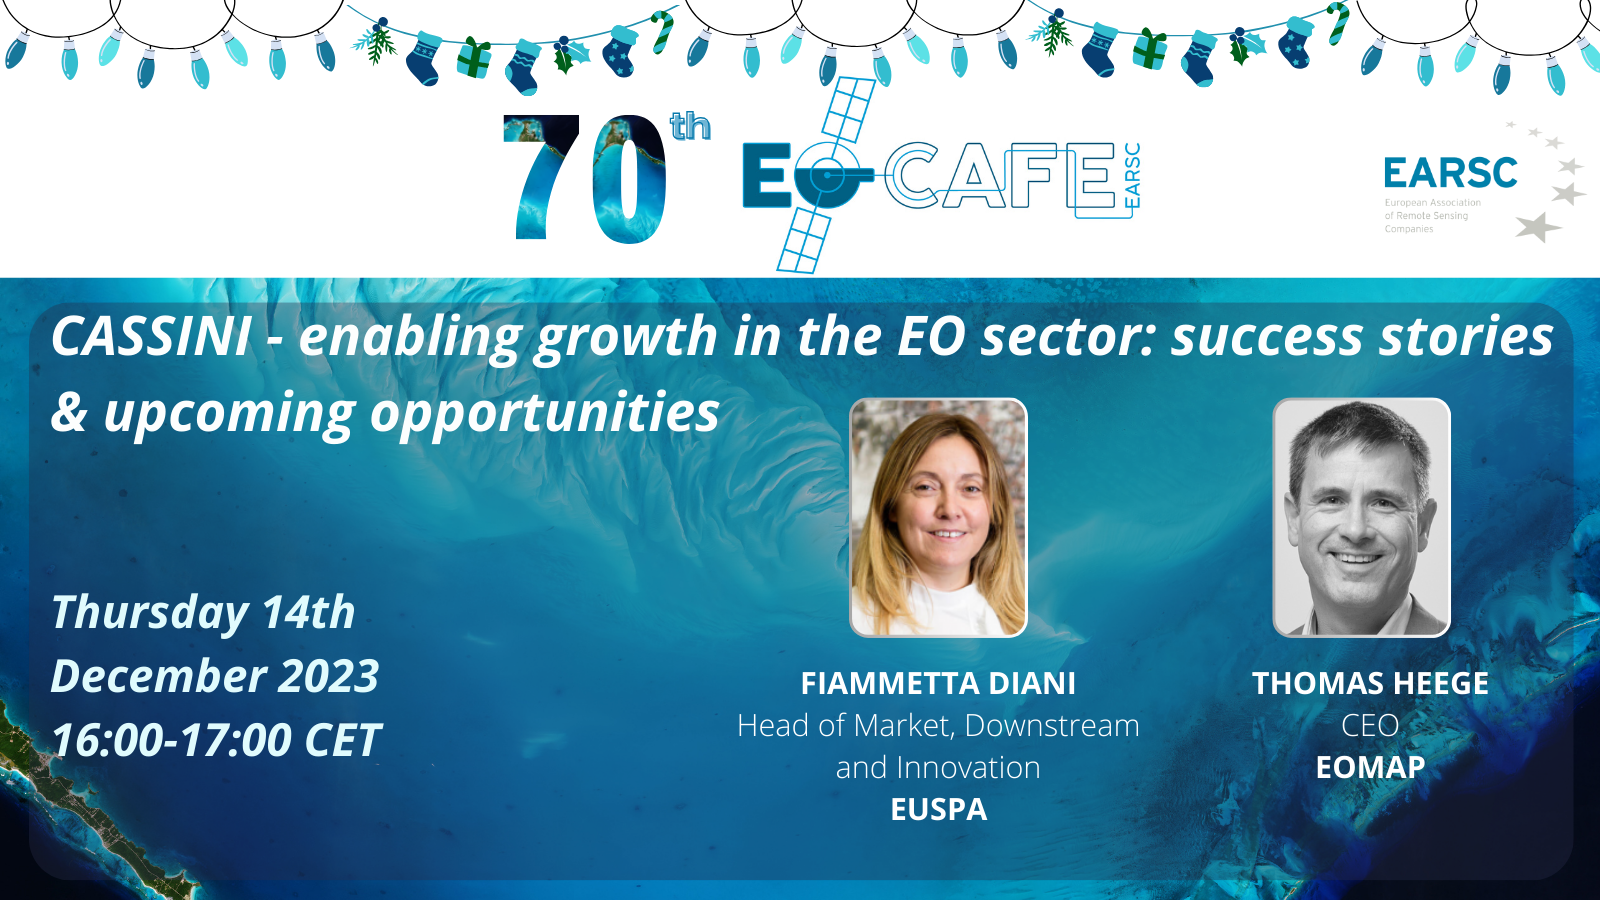 EOcafe: CASSINI – enabling growth in the EO sector: success stories & upcoming opportunities